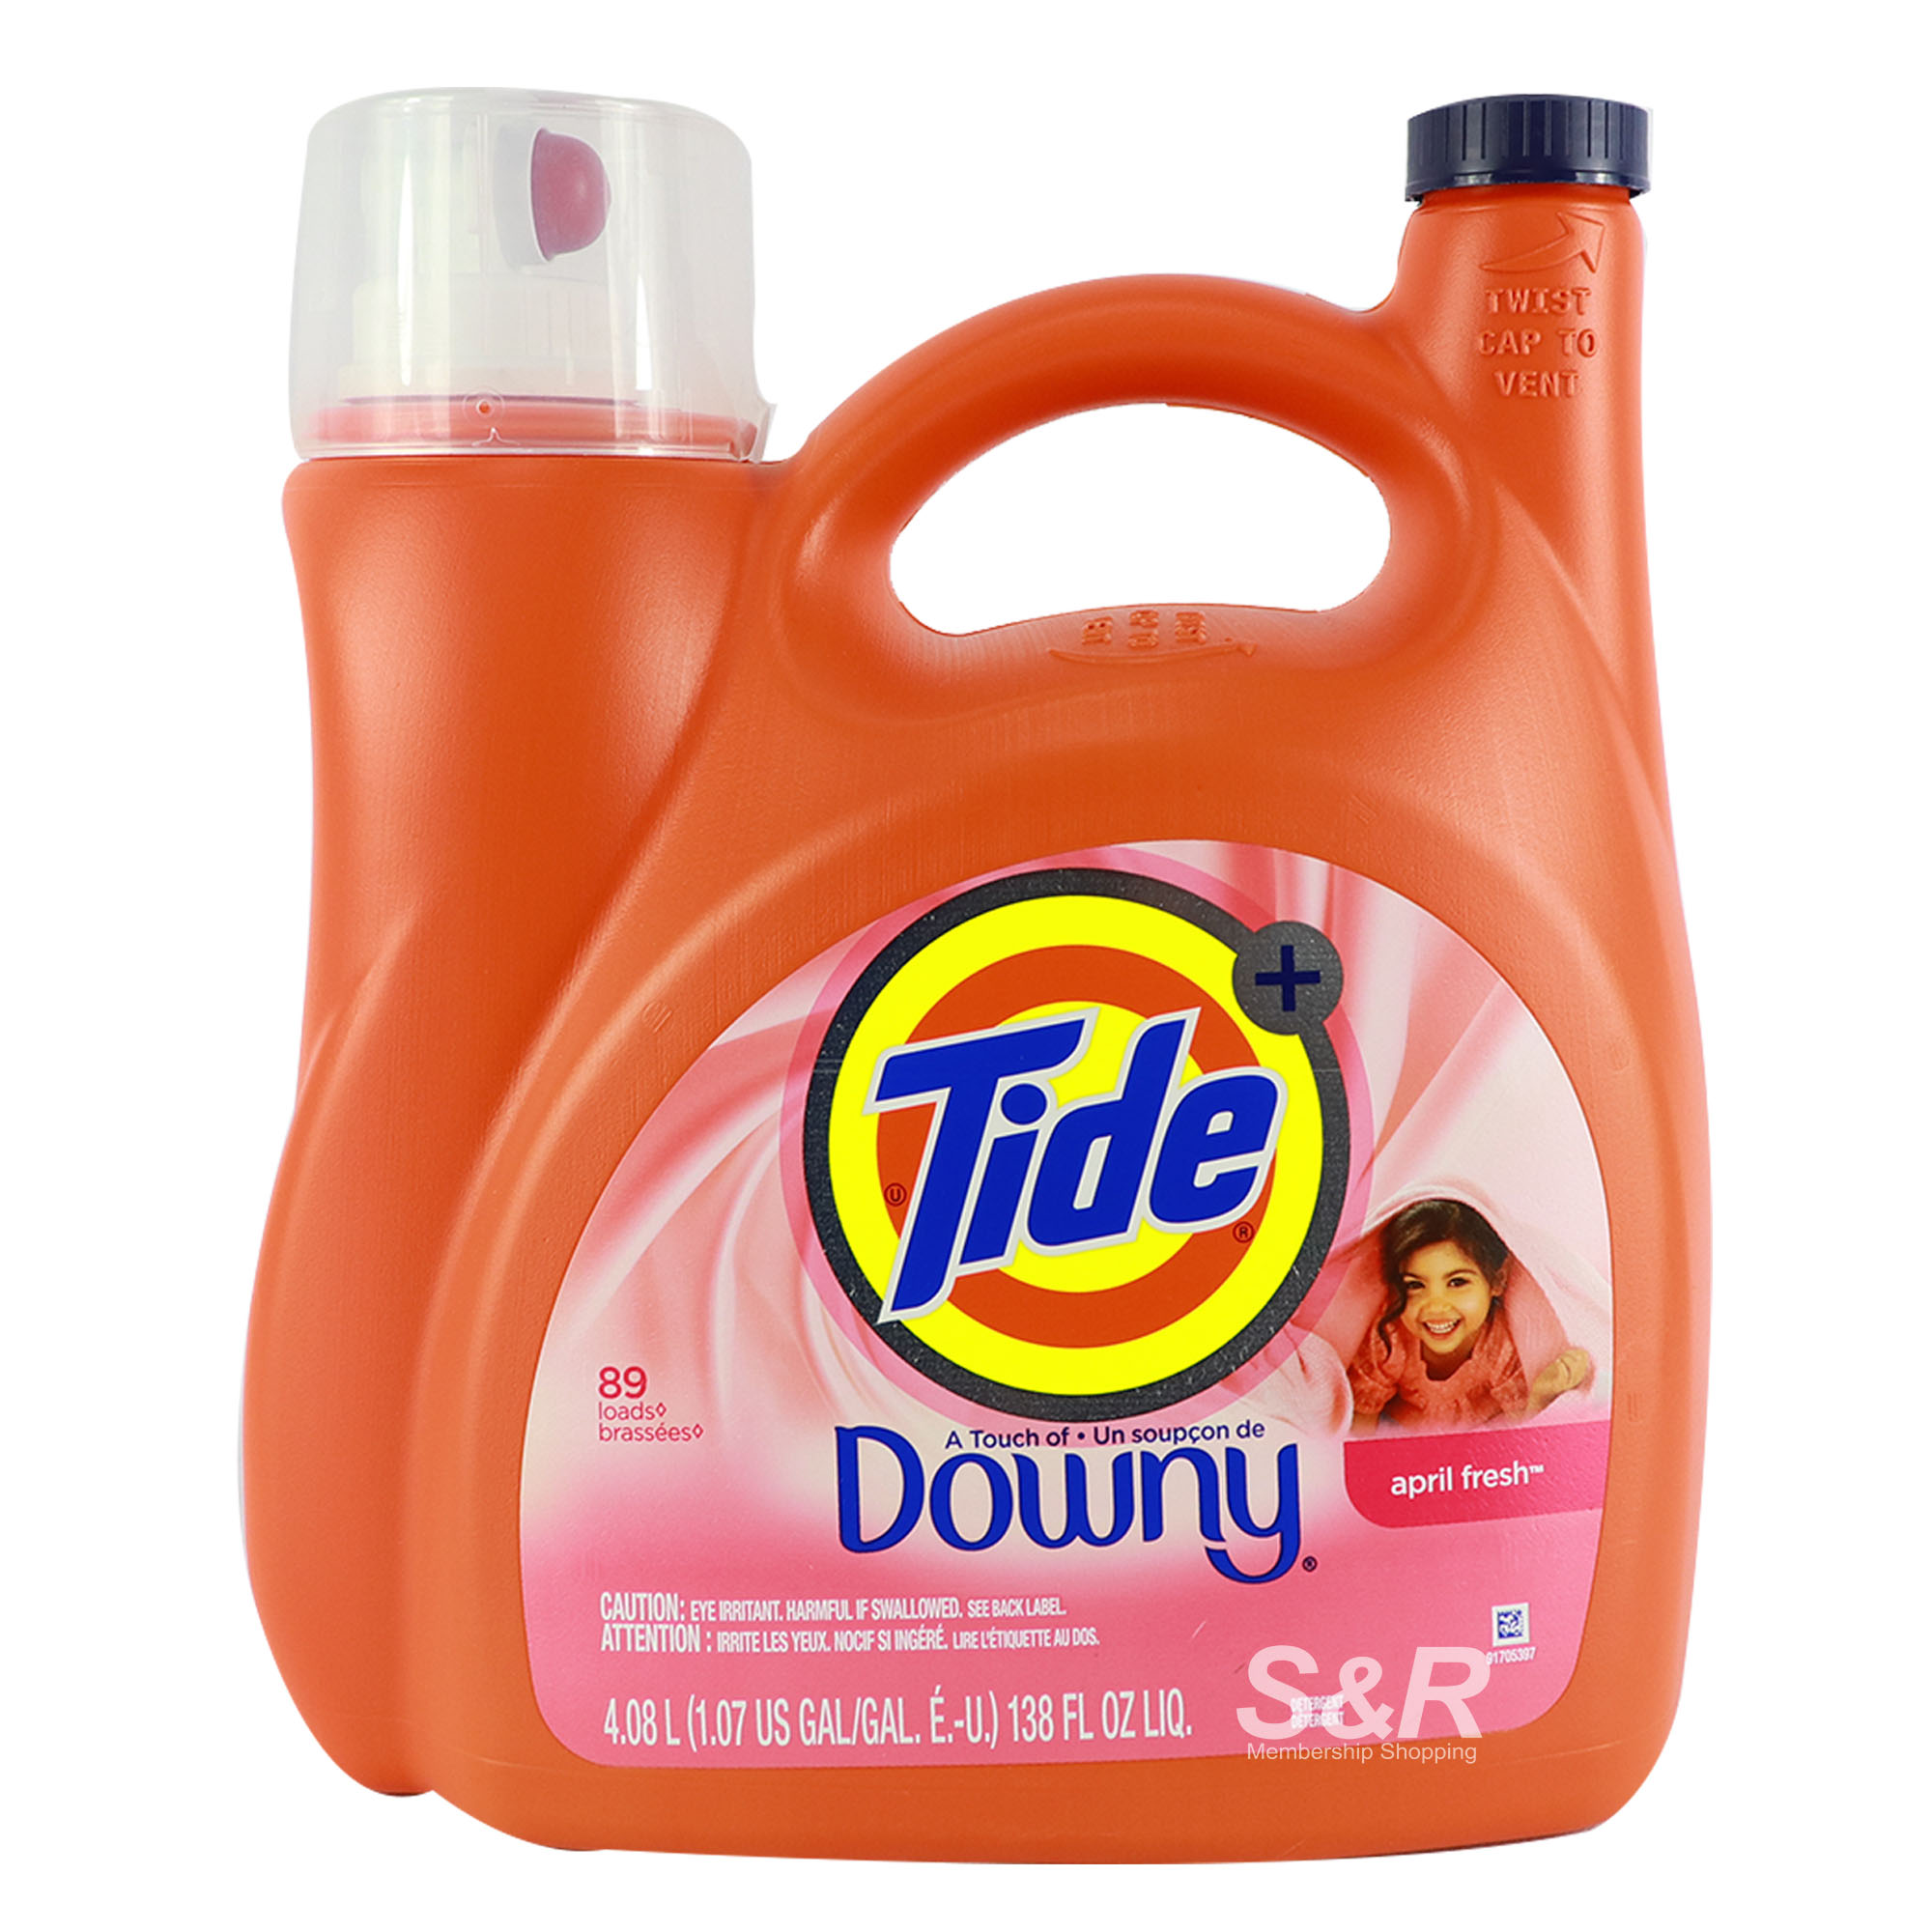 Tide Touch of Downy April Fresh Detergent 4.08L